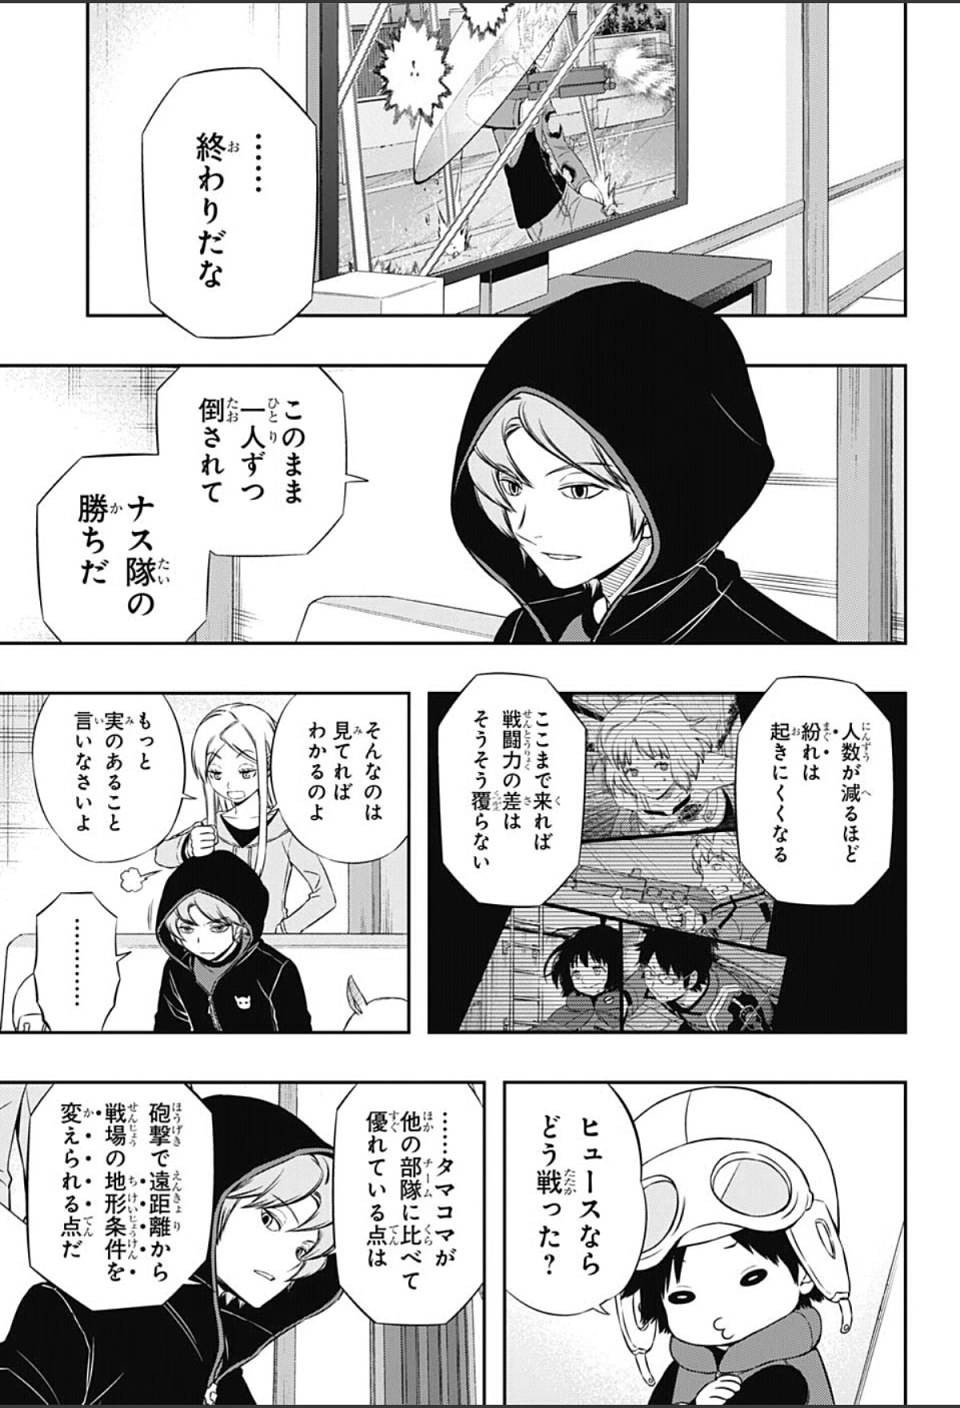 World Trigger - Chapter 102 - Page 5